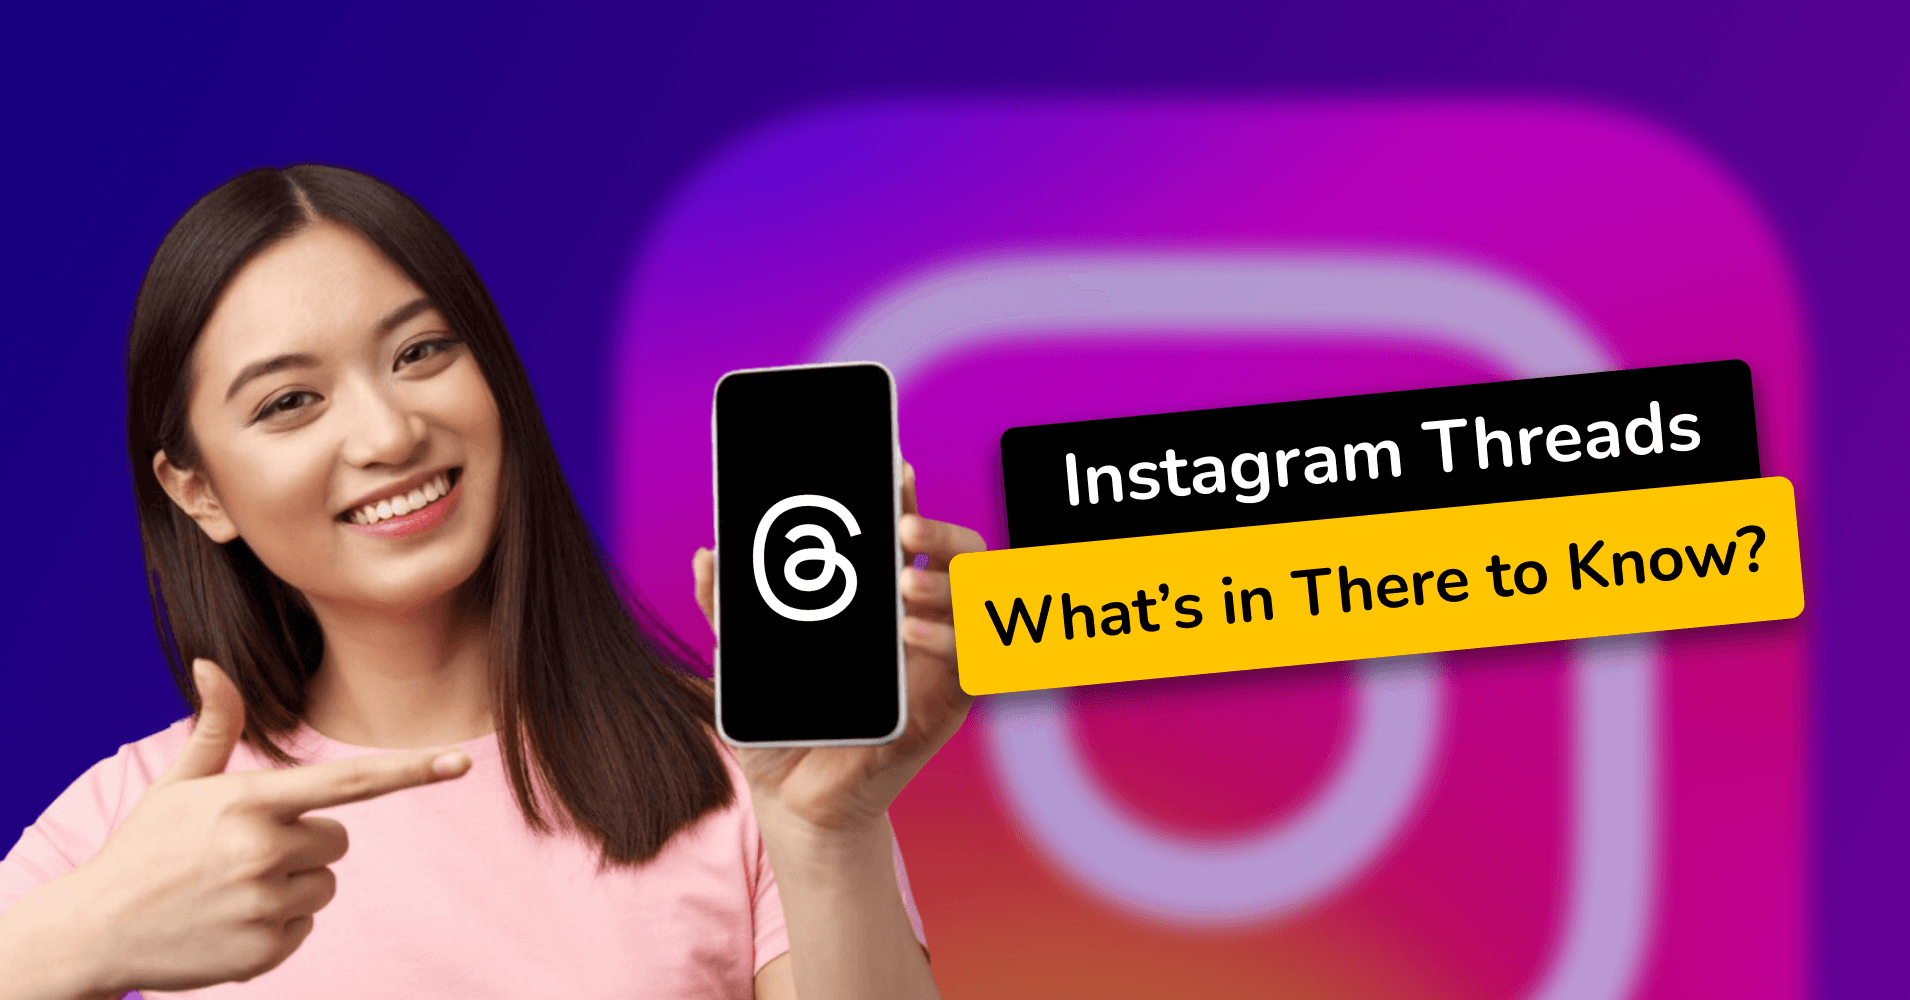 Instagram Threads is a newly launched social media that created hype in the virtual world.